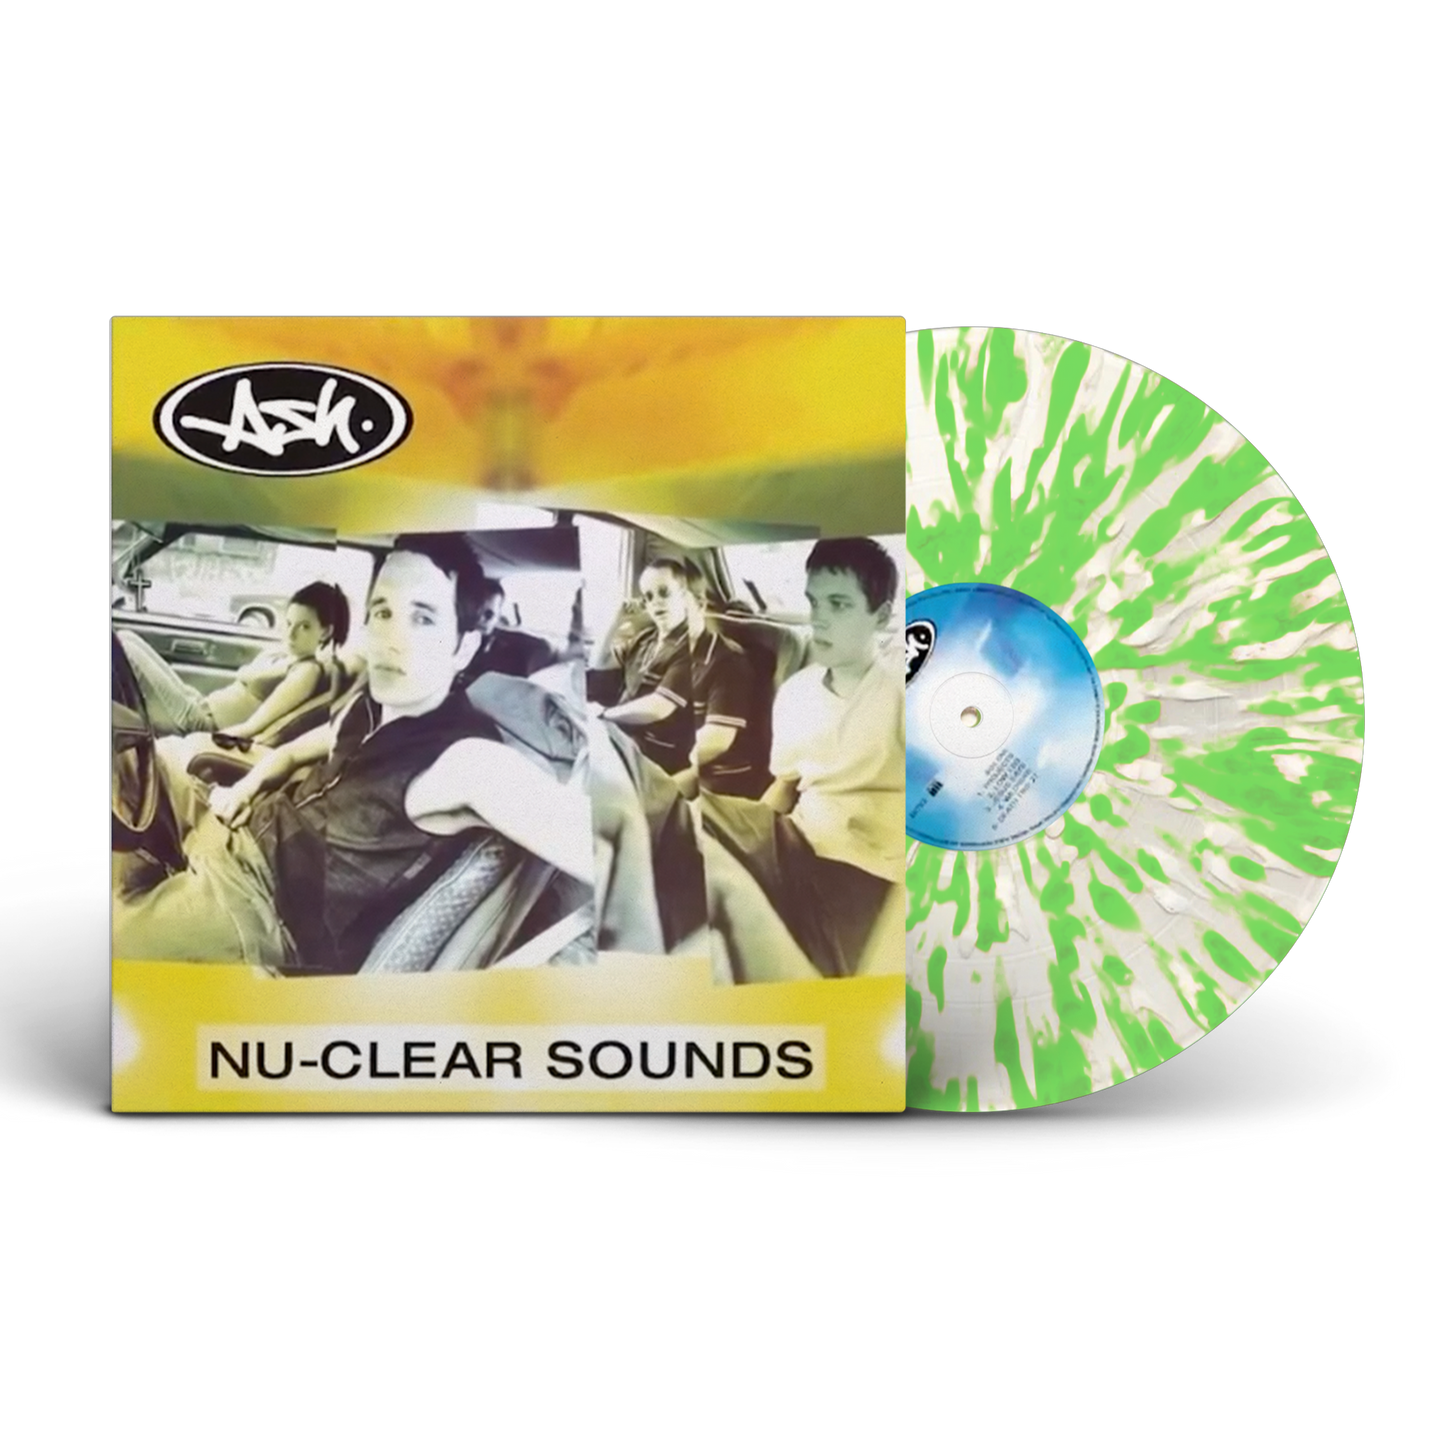 Ash - Nu-Clear Sounds | Buy the Vinyl LP from Flying Nun Records